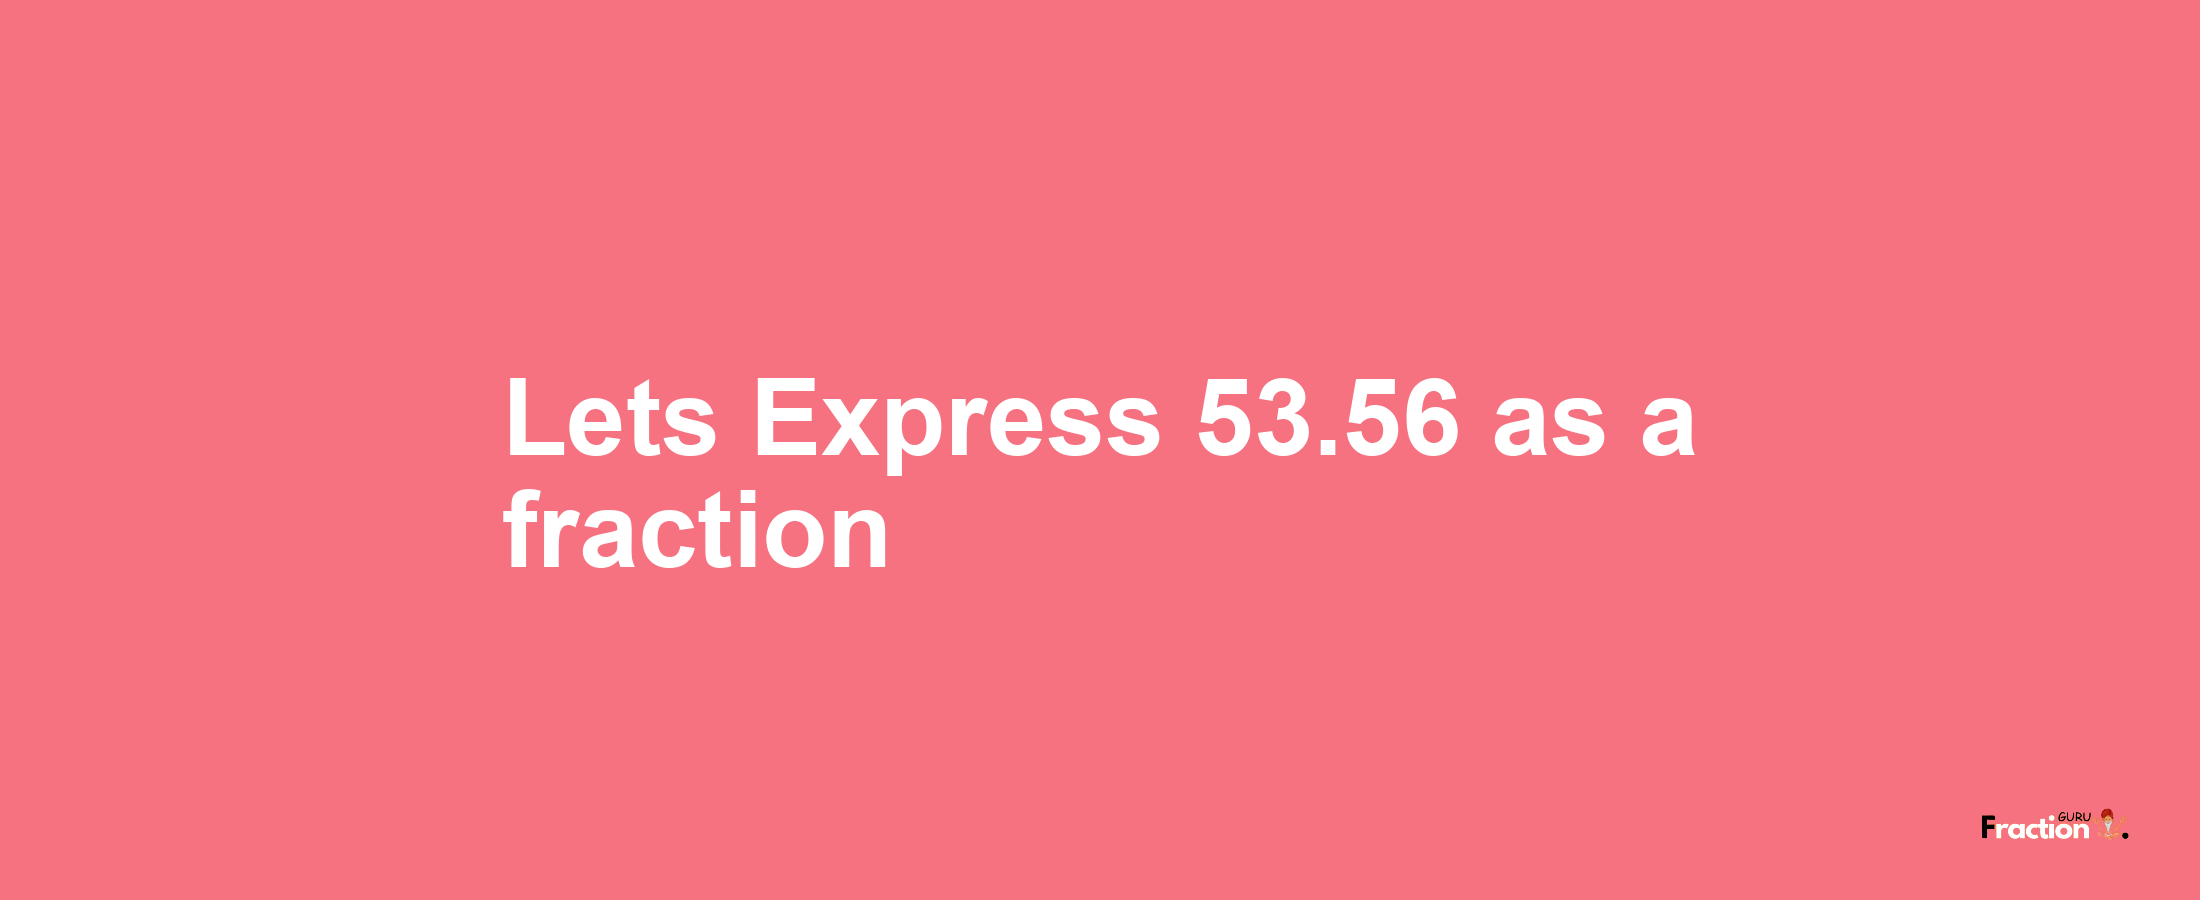 Lets Express 53.56 as afraction